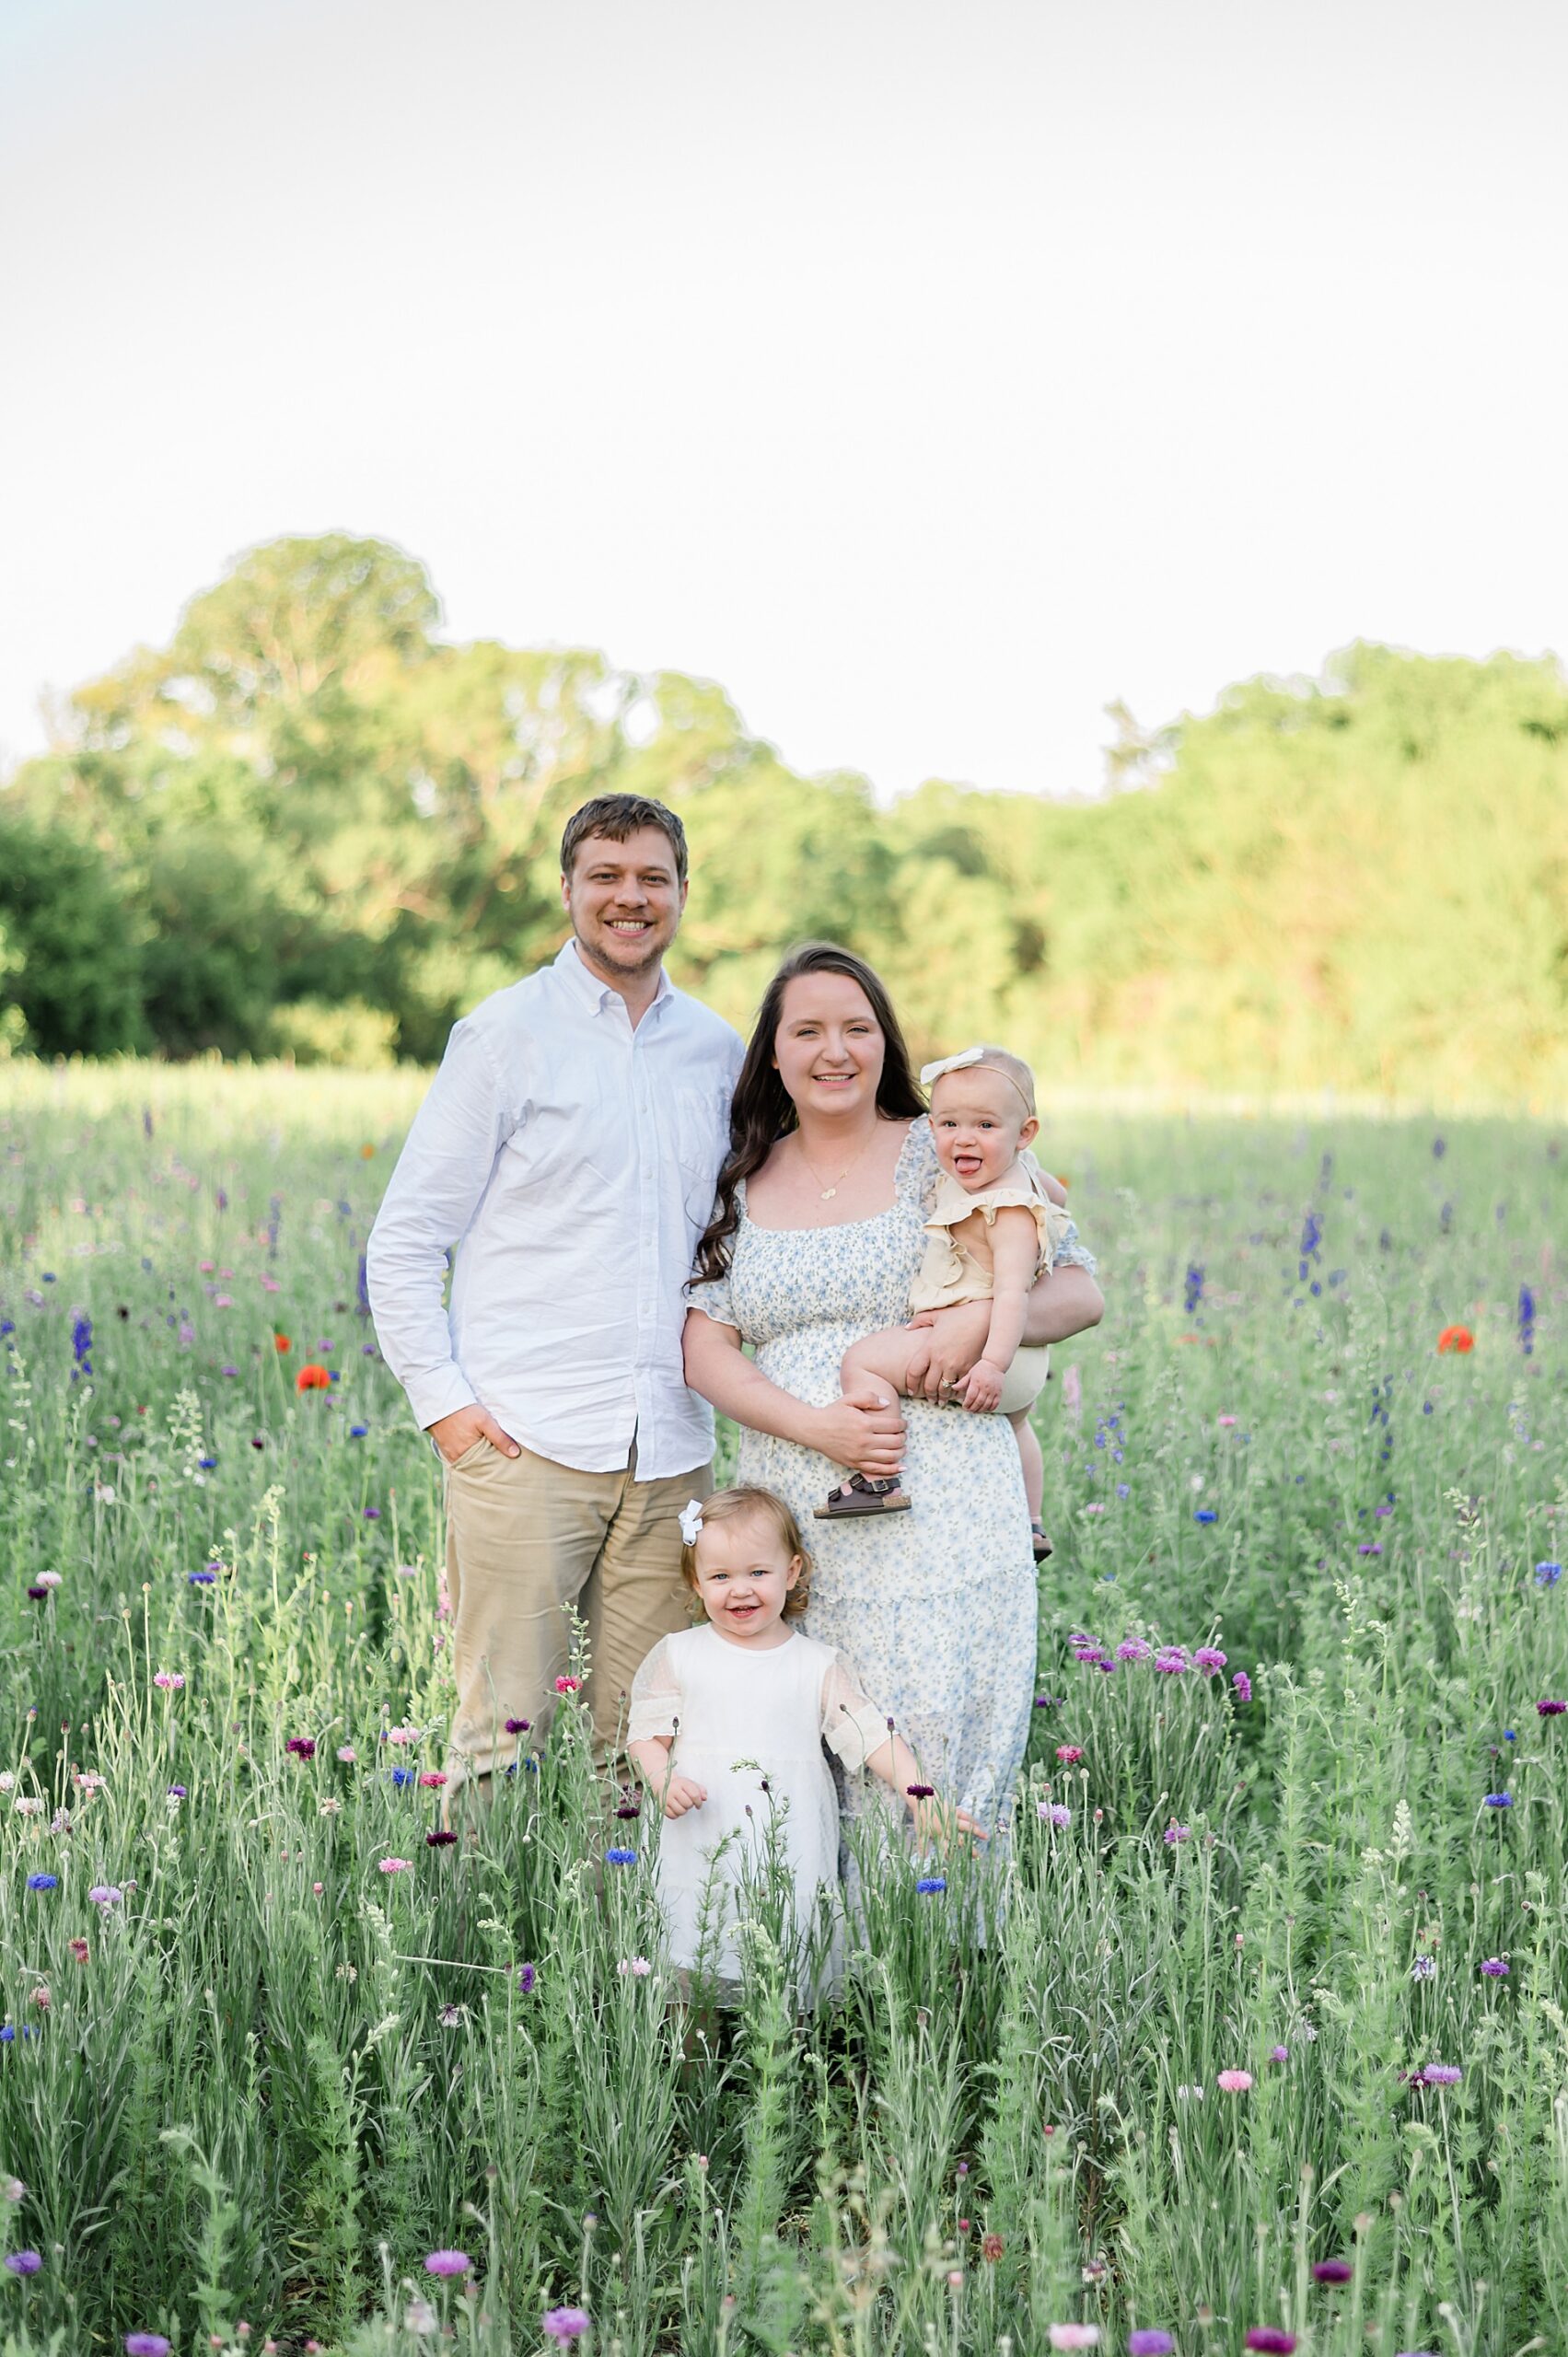 Family photos in field of wildflowers taken by Lindsey Dutton Photography, a Dallas family photographer